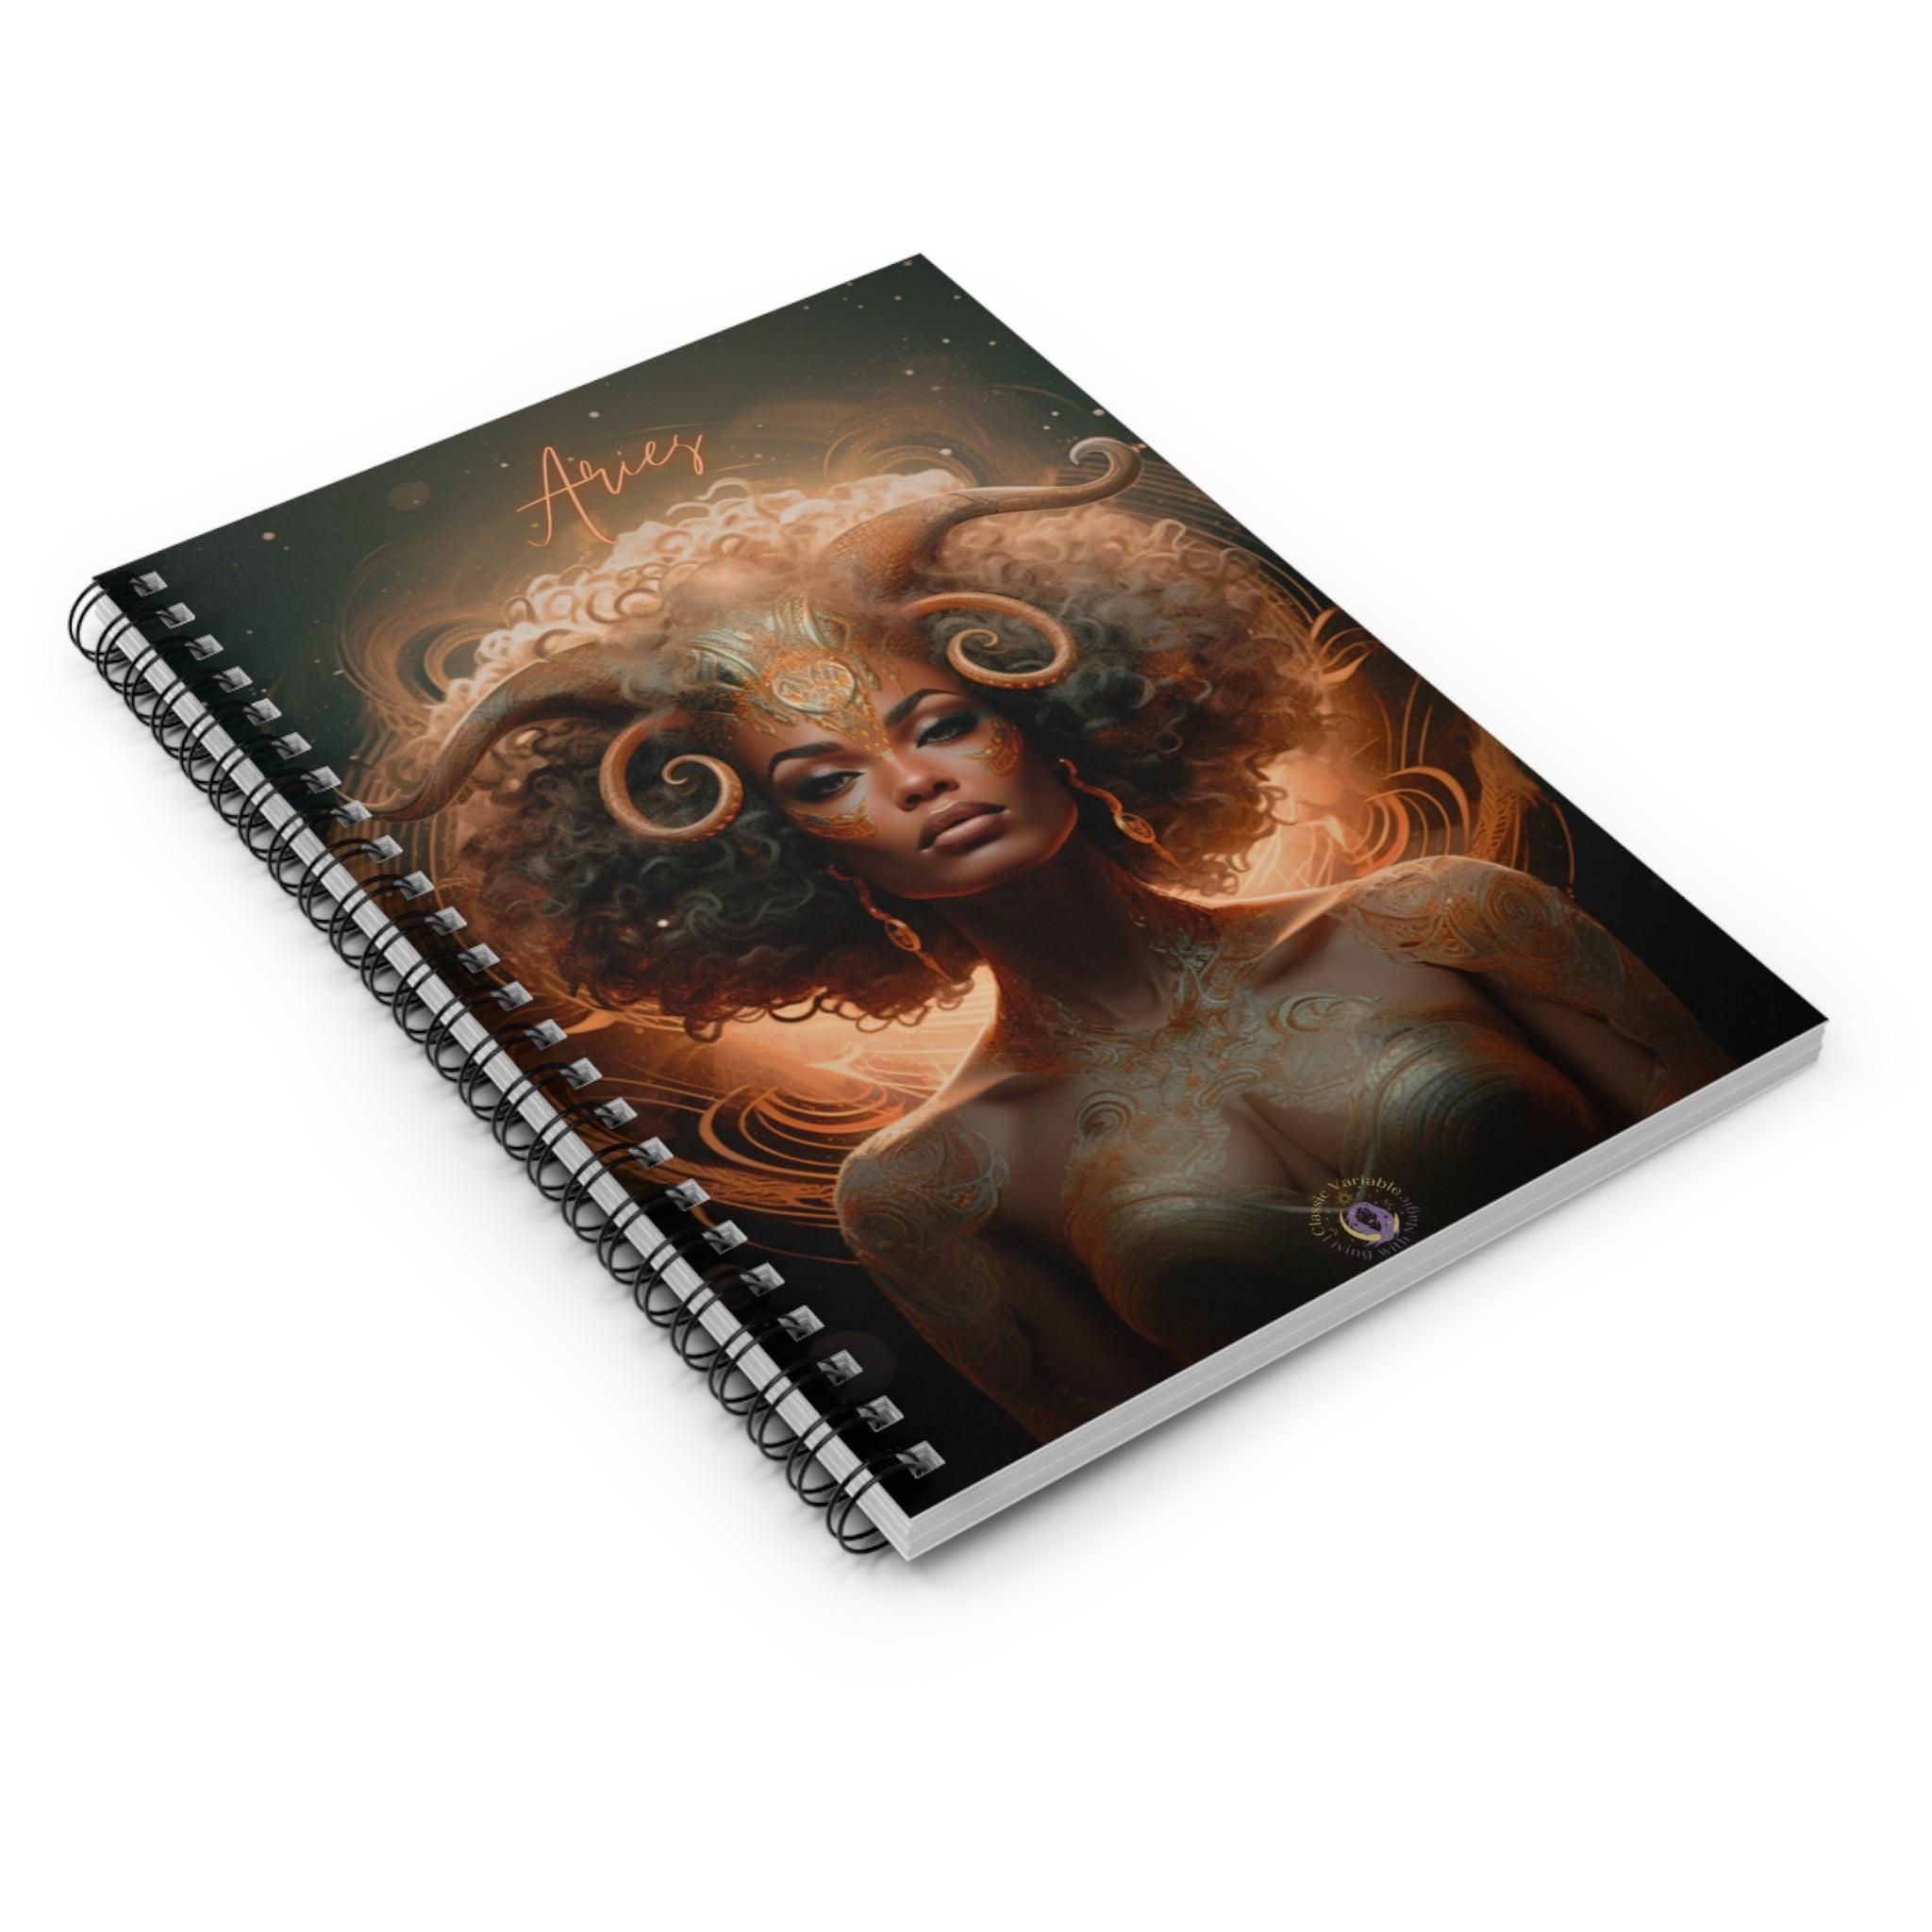 Aries Spiral Notebook - Ruled Line - Classic Variable